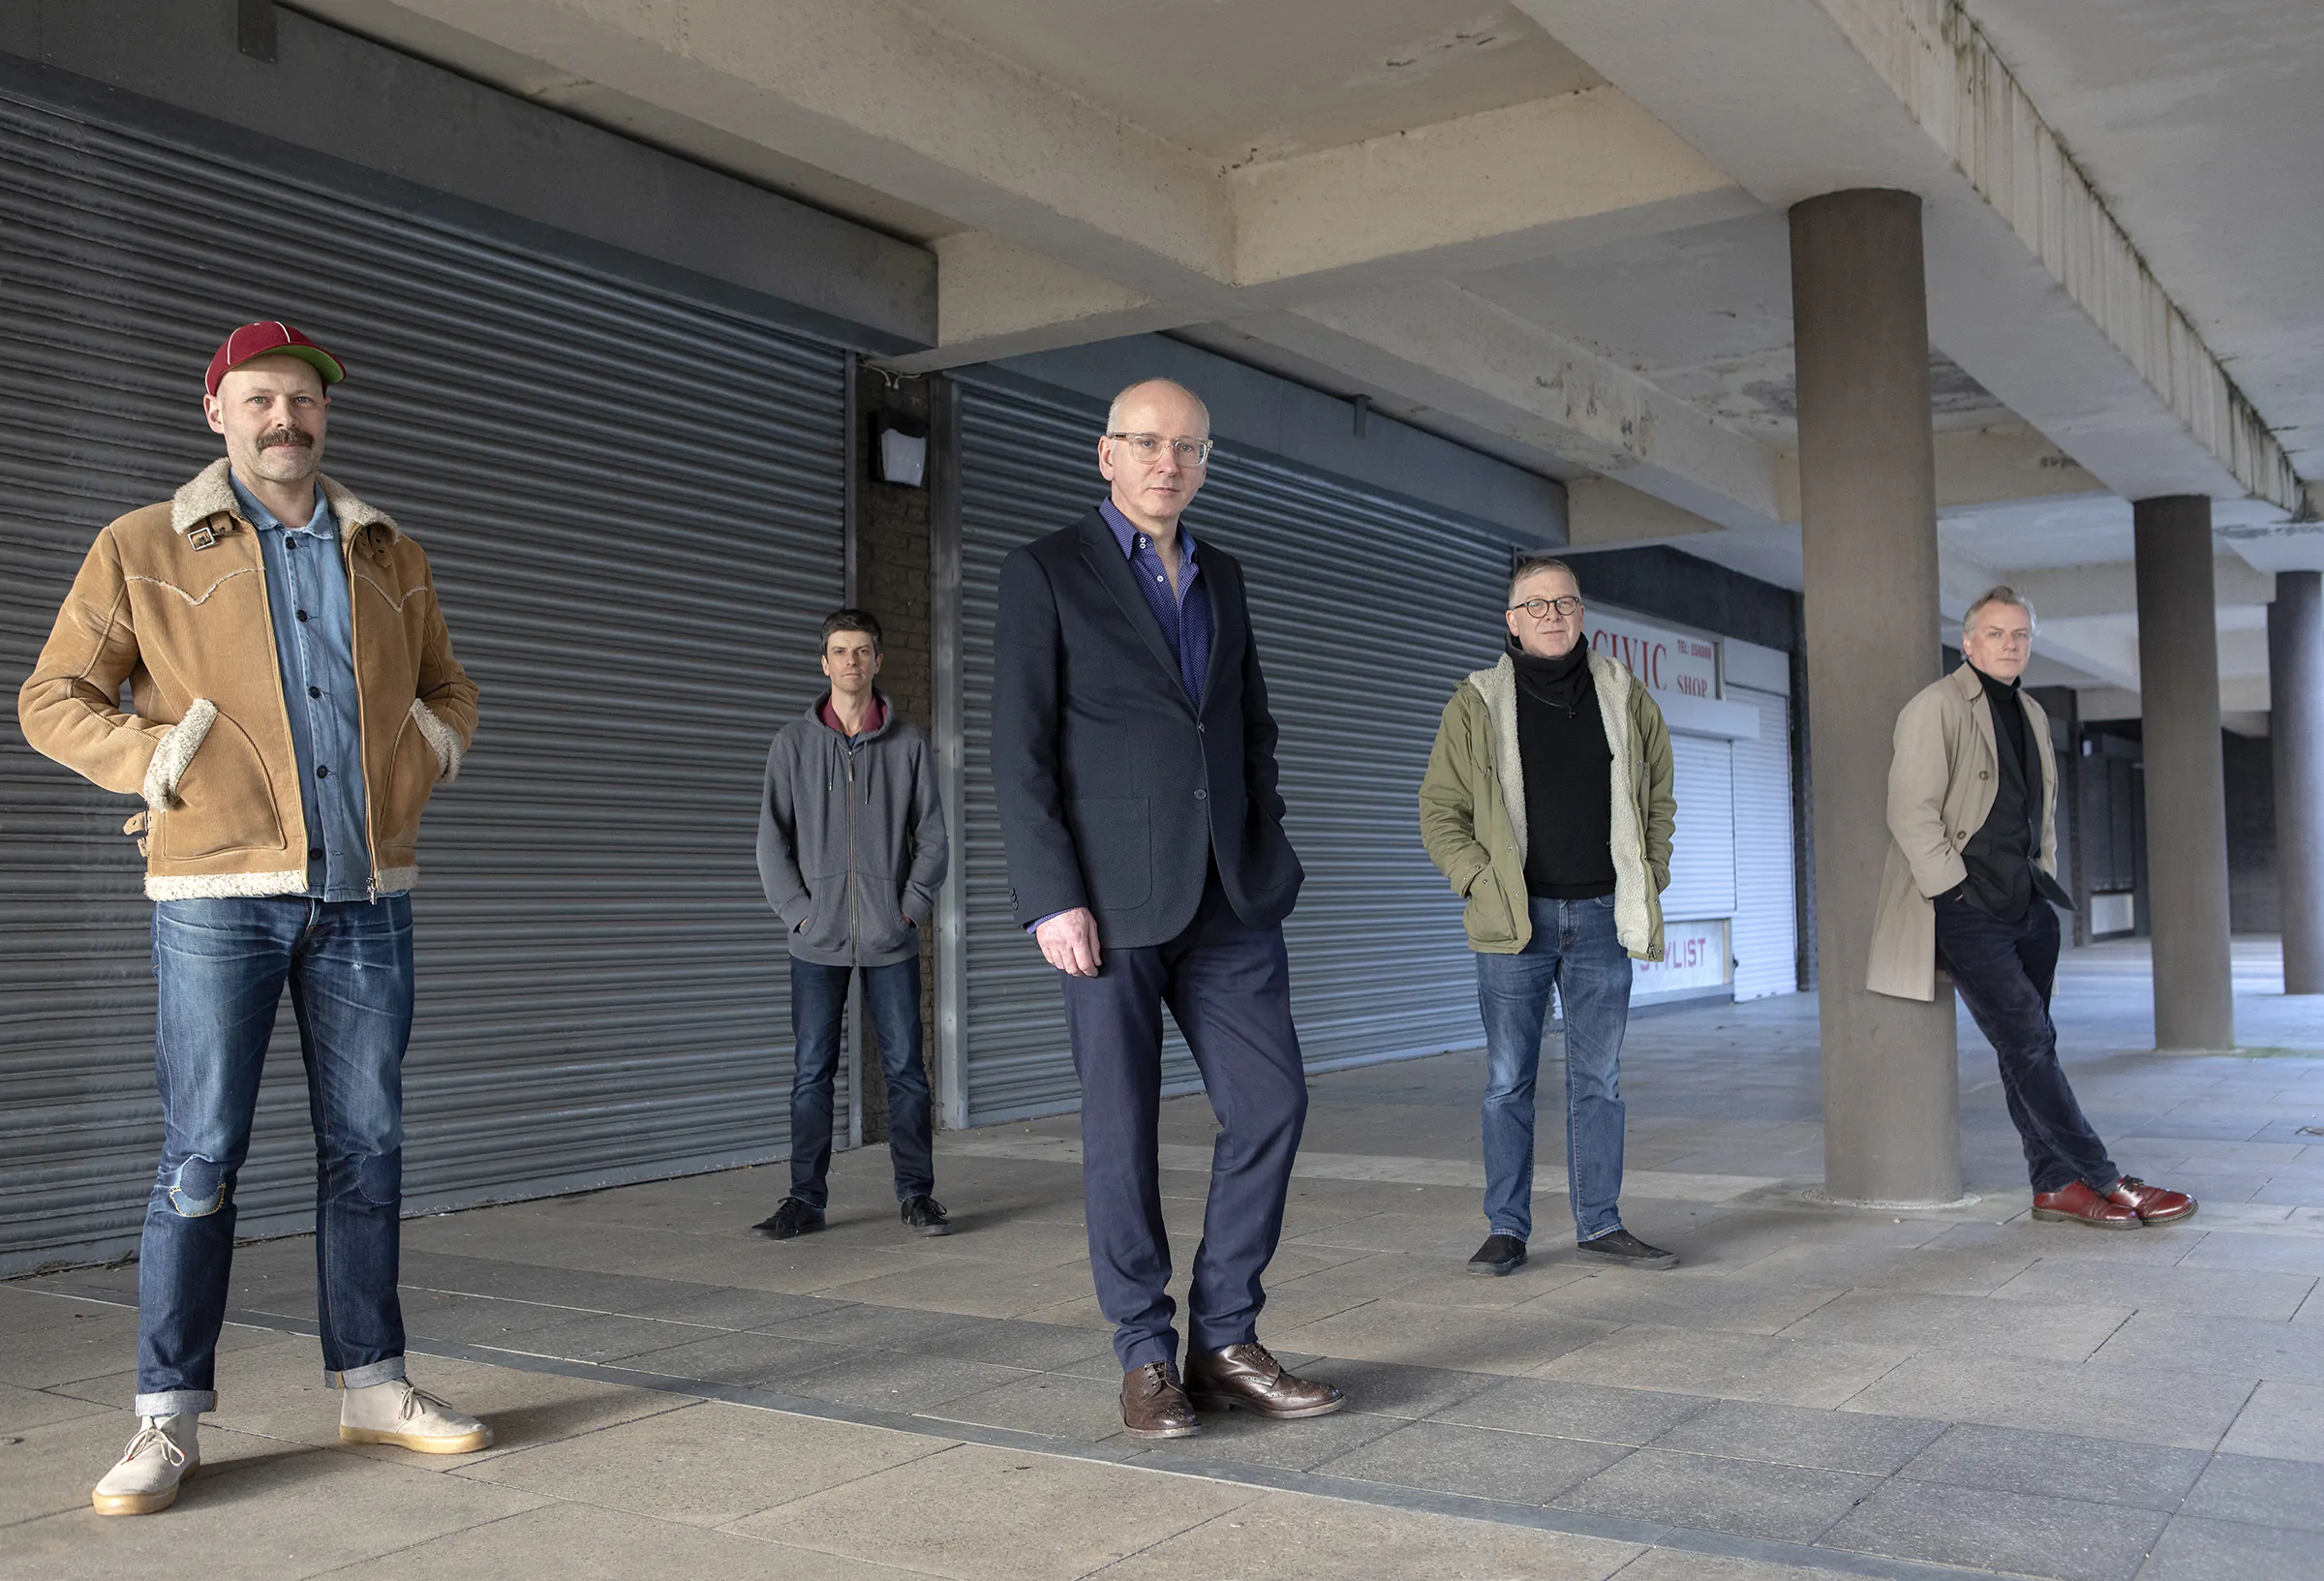 TEENAGE FANCLUB share new video for ‘In Our Dreams’ from new album ‘Endless Arcade’ out 30th April